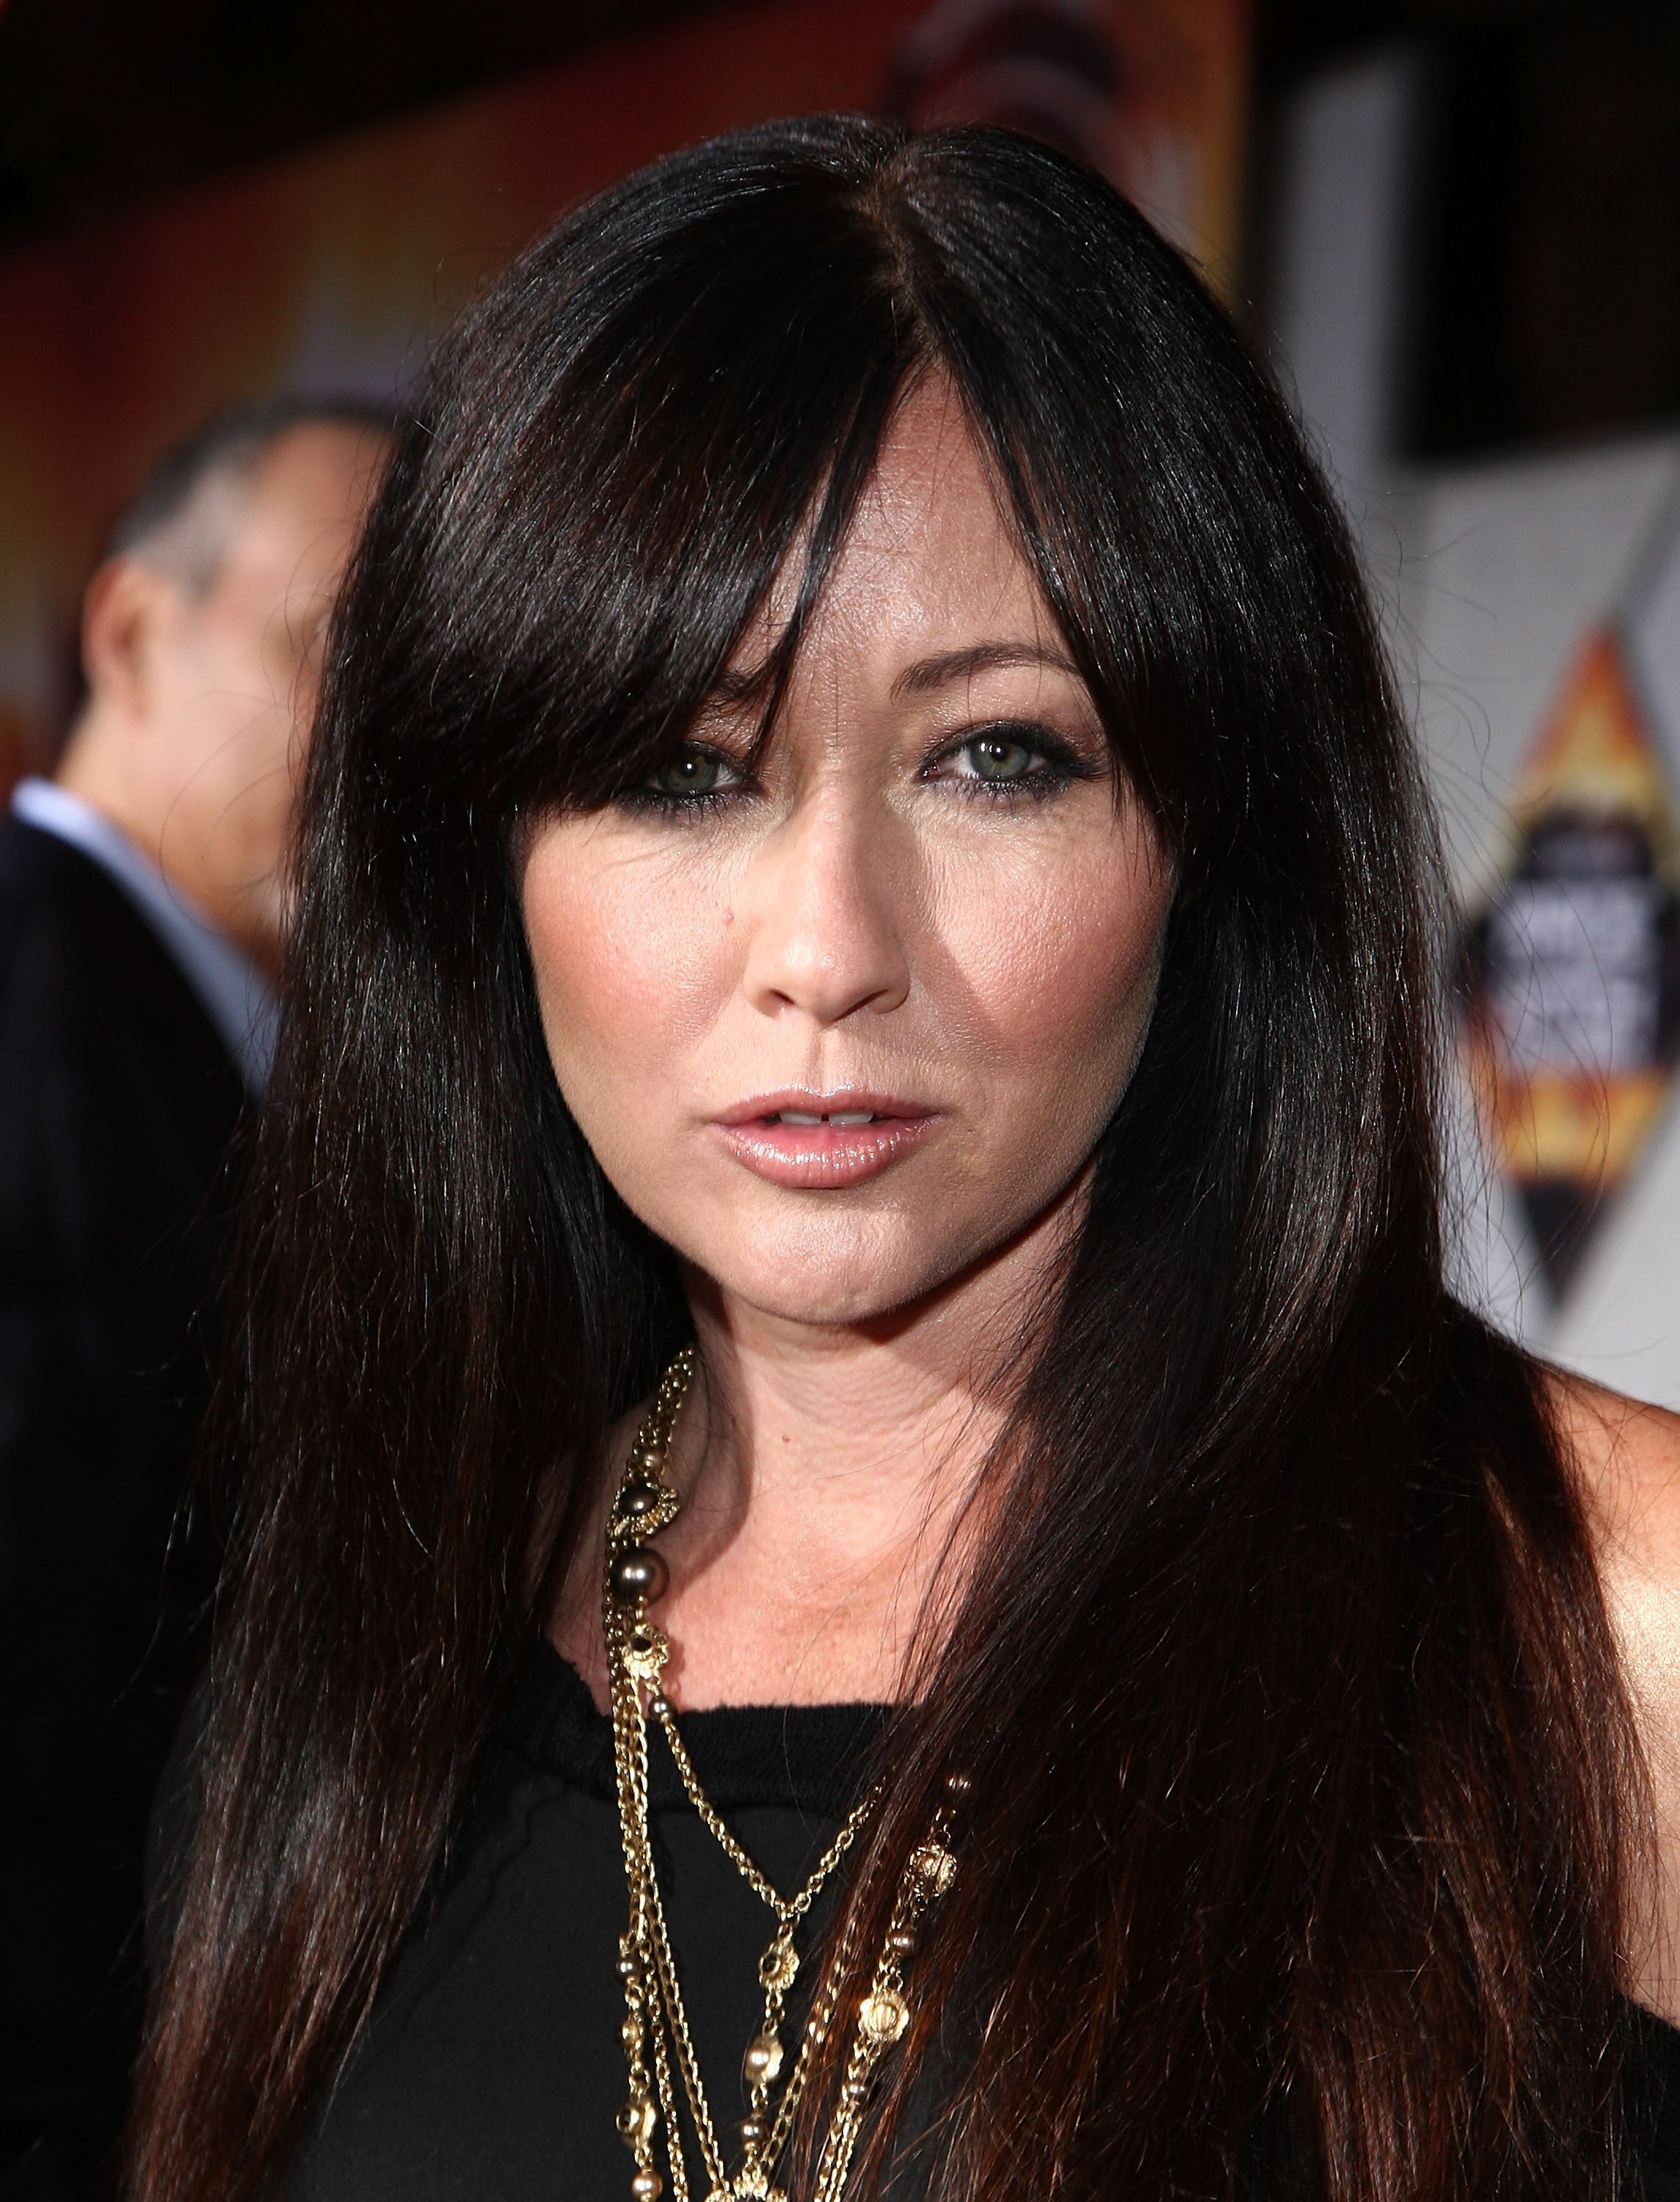 Shannen Doherty at the 2015 Baby 2 Baby Gala | Photo: Getty Images